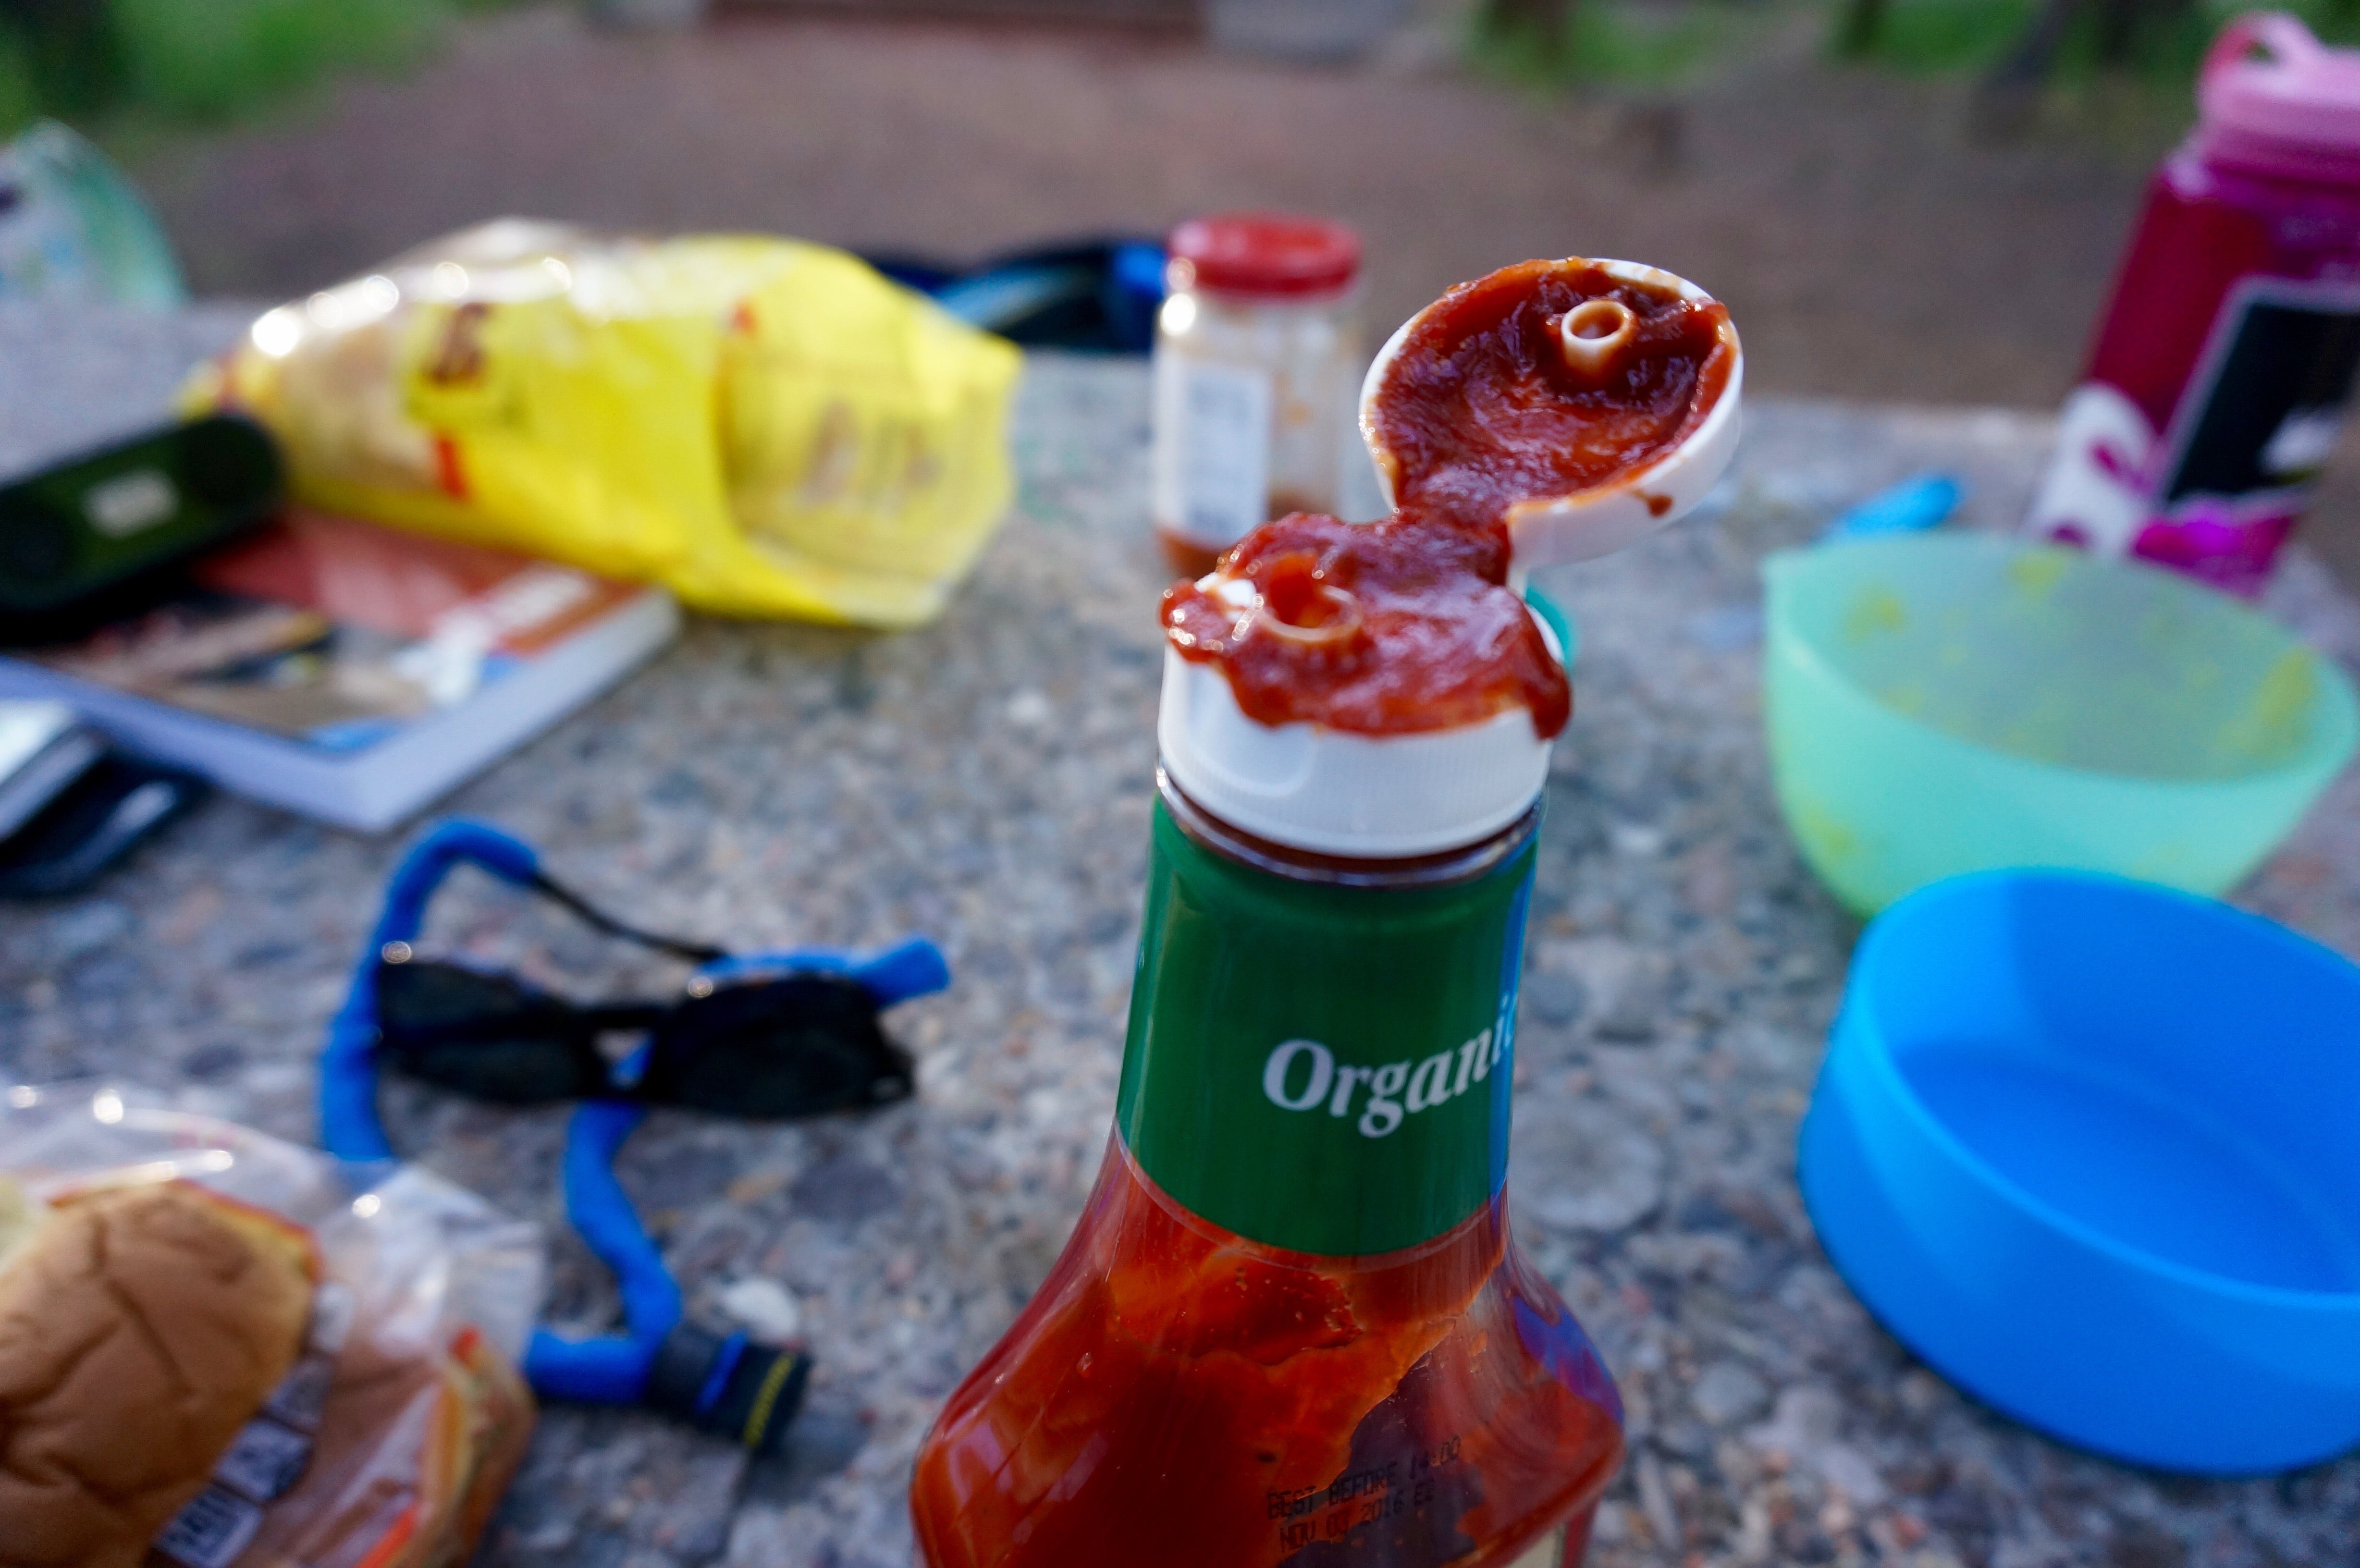 Don't make the mistake of forgetting that you're probably a couple thousand feet higher than where you packed, preventing an accidental ketchup explosion.